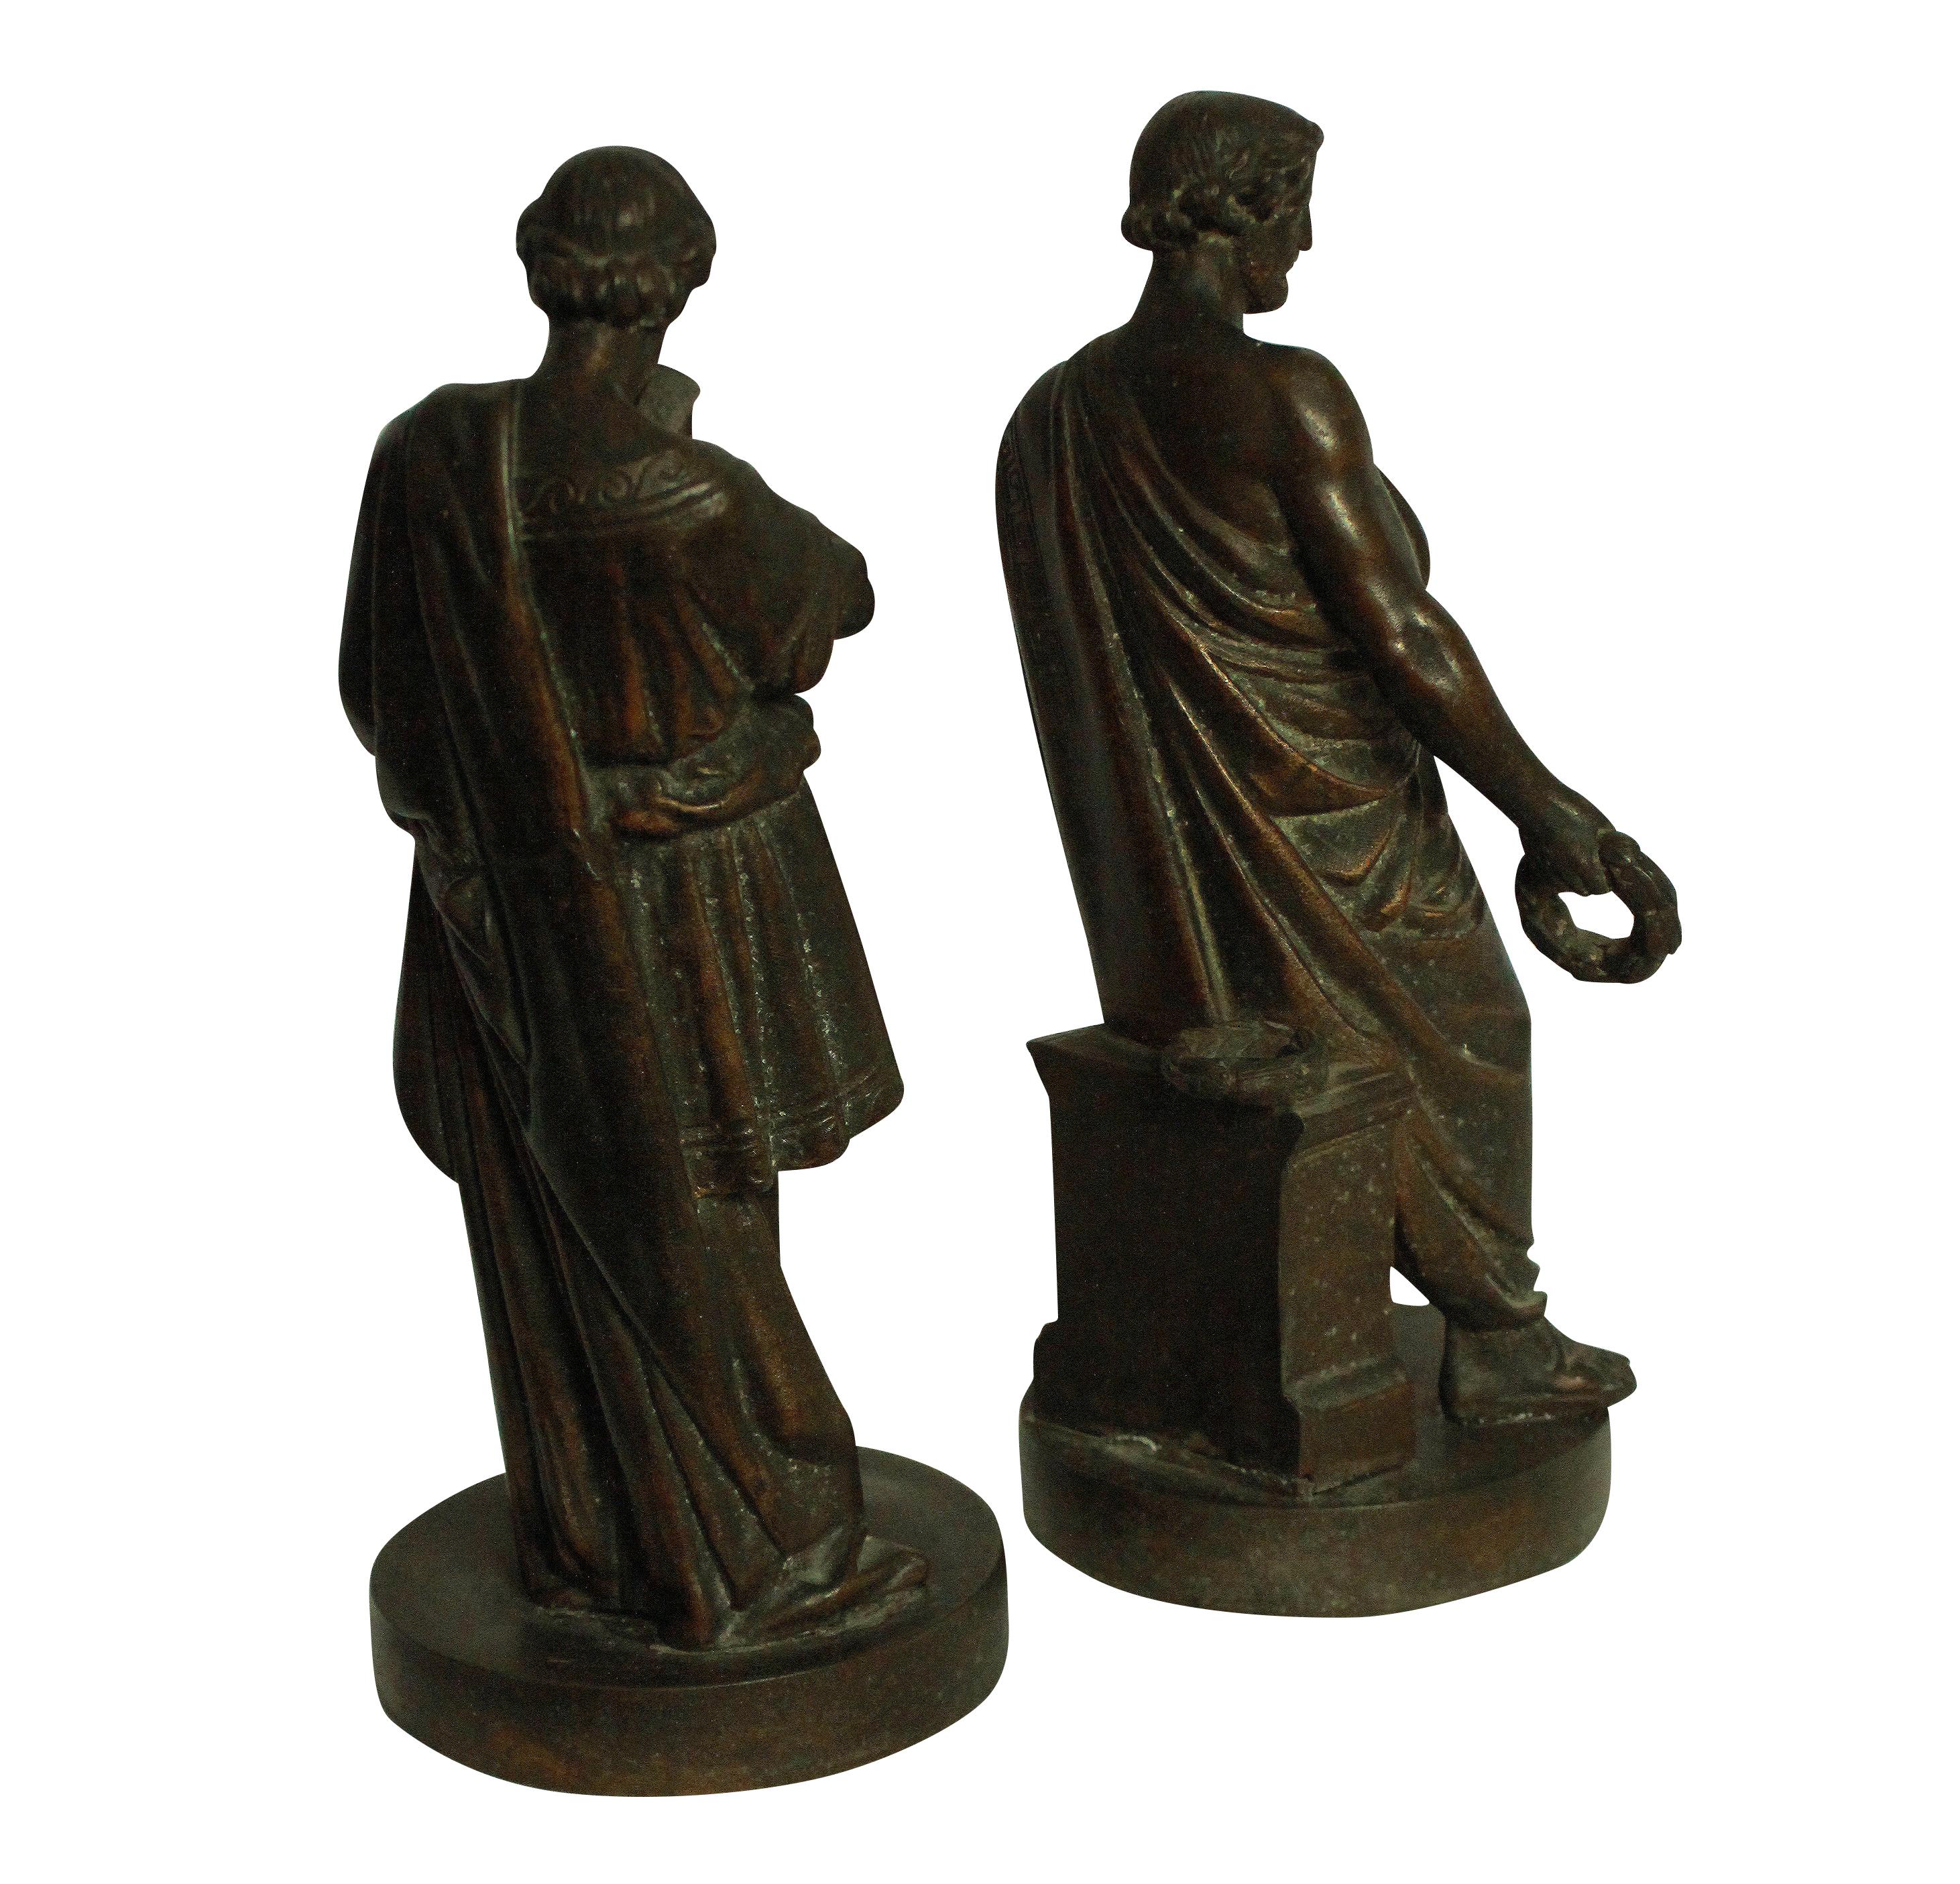 Grand Tour Pair of Bronzes Depicting Pericles and Phidias